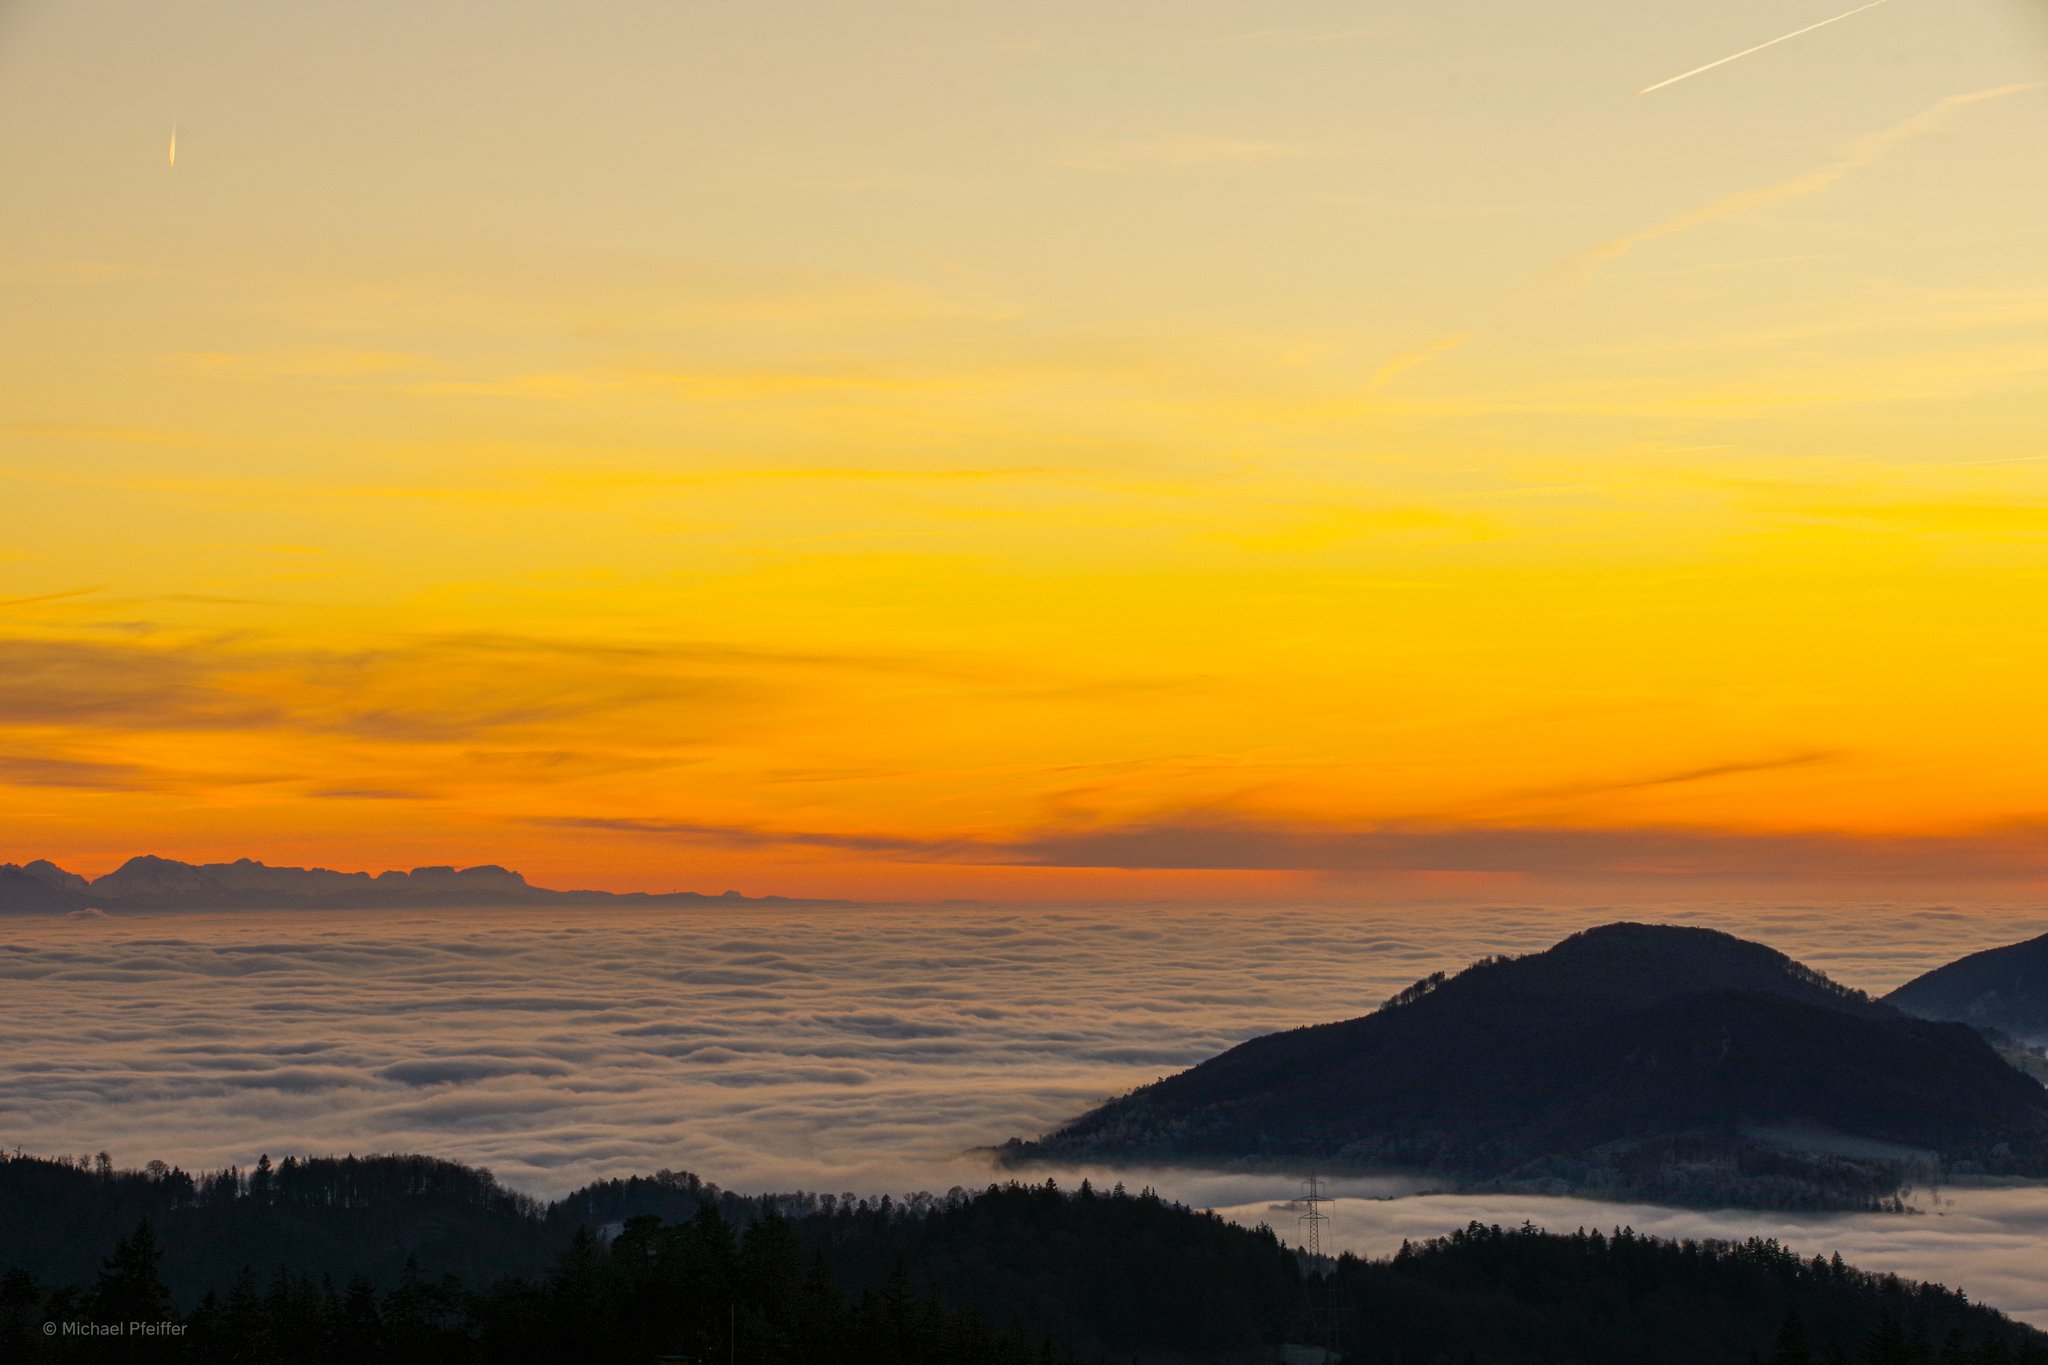 3rd Place Evening glow above a sea of fog in the Jura mountains in switzerland by Wetter Ludwigsburg @lubuwetter